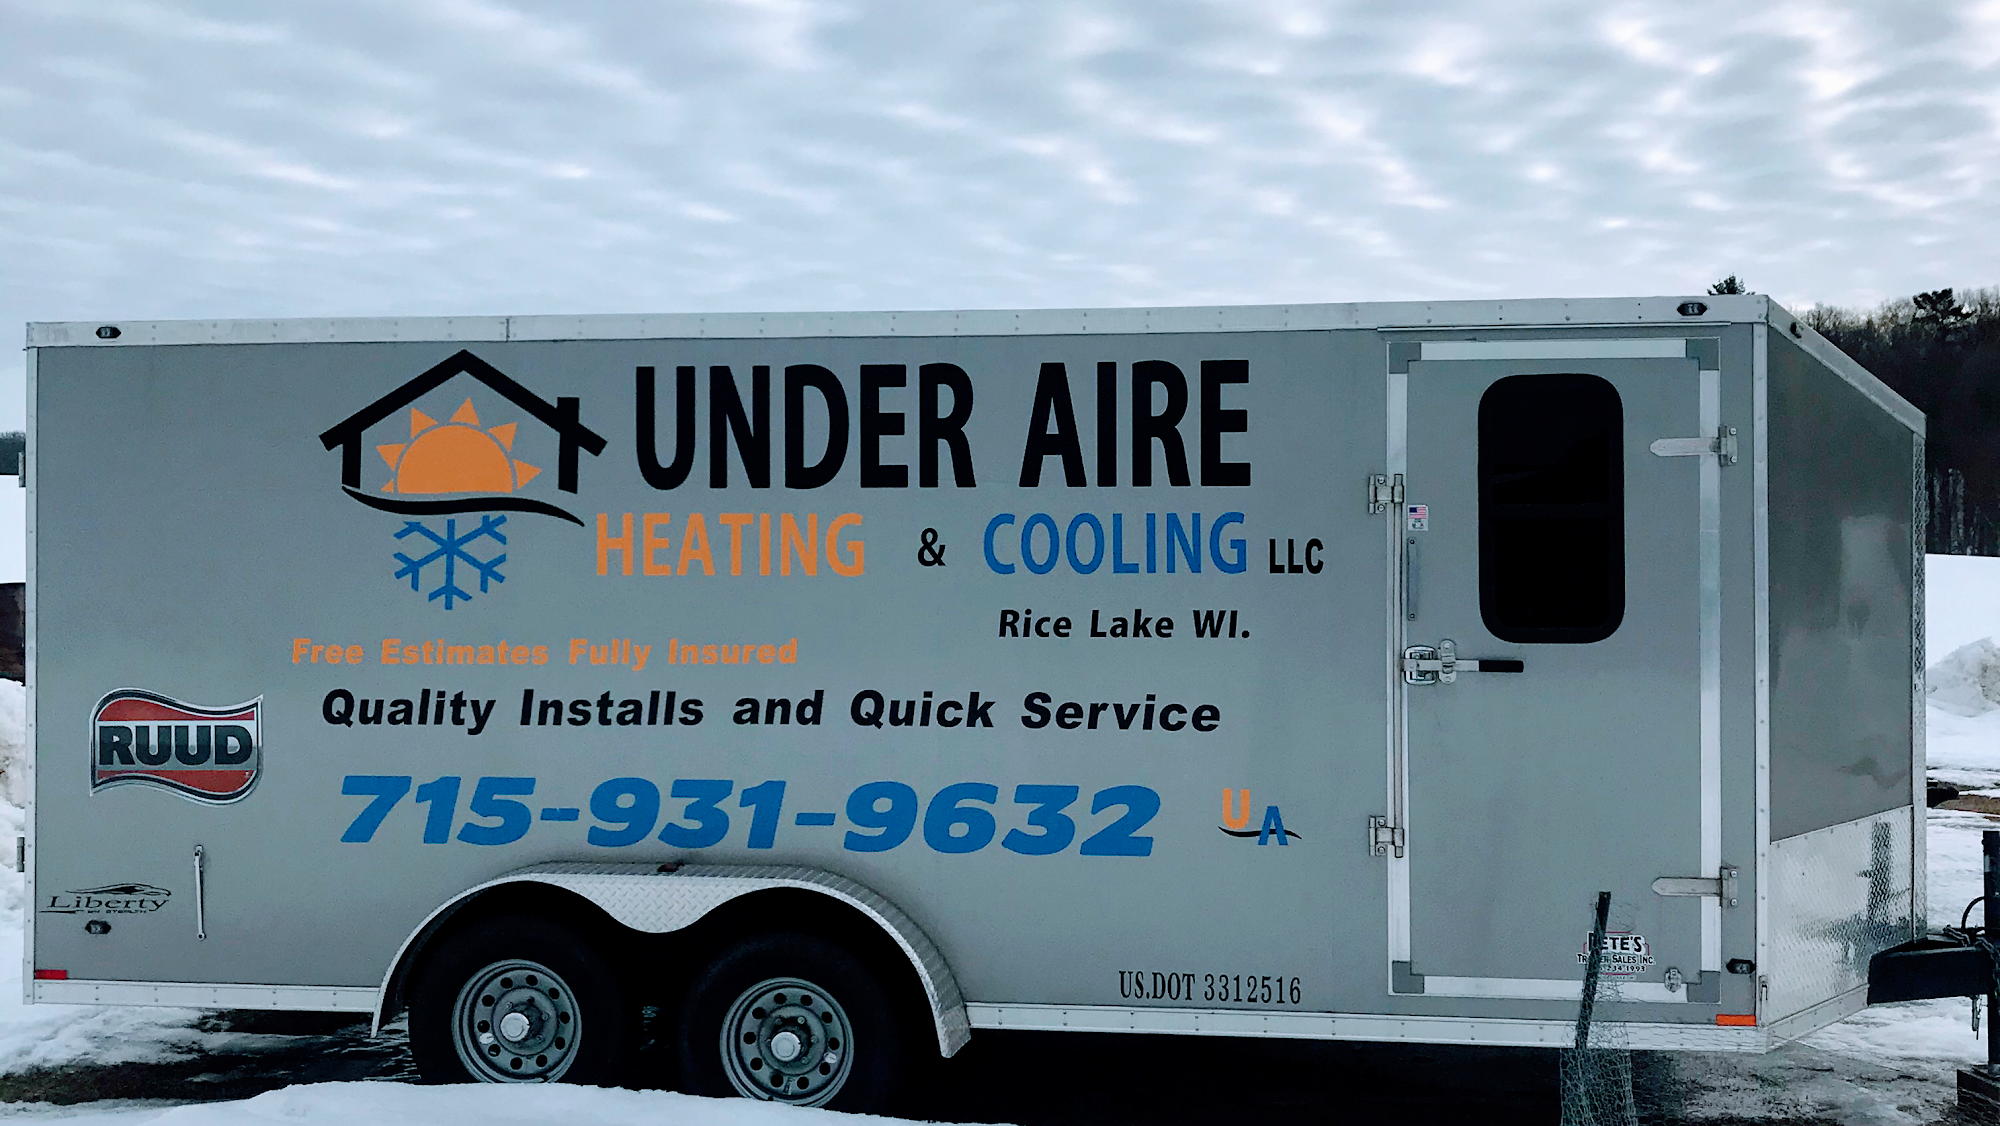 Under Aire Heating & Cooling LLC